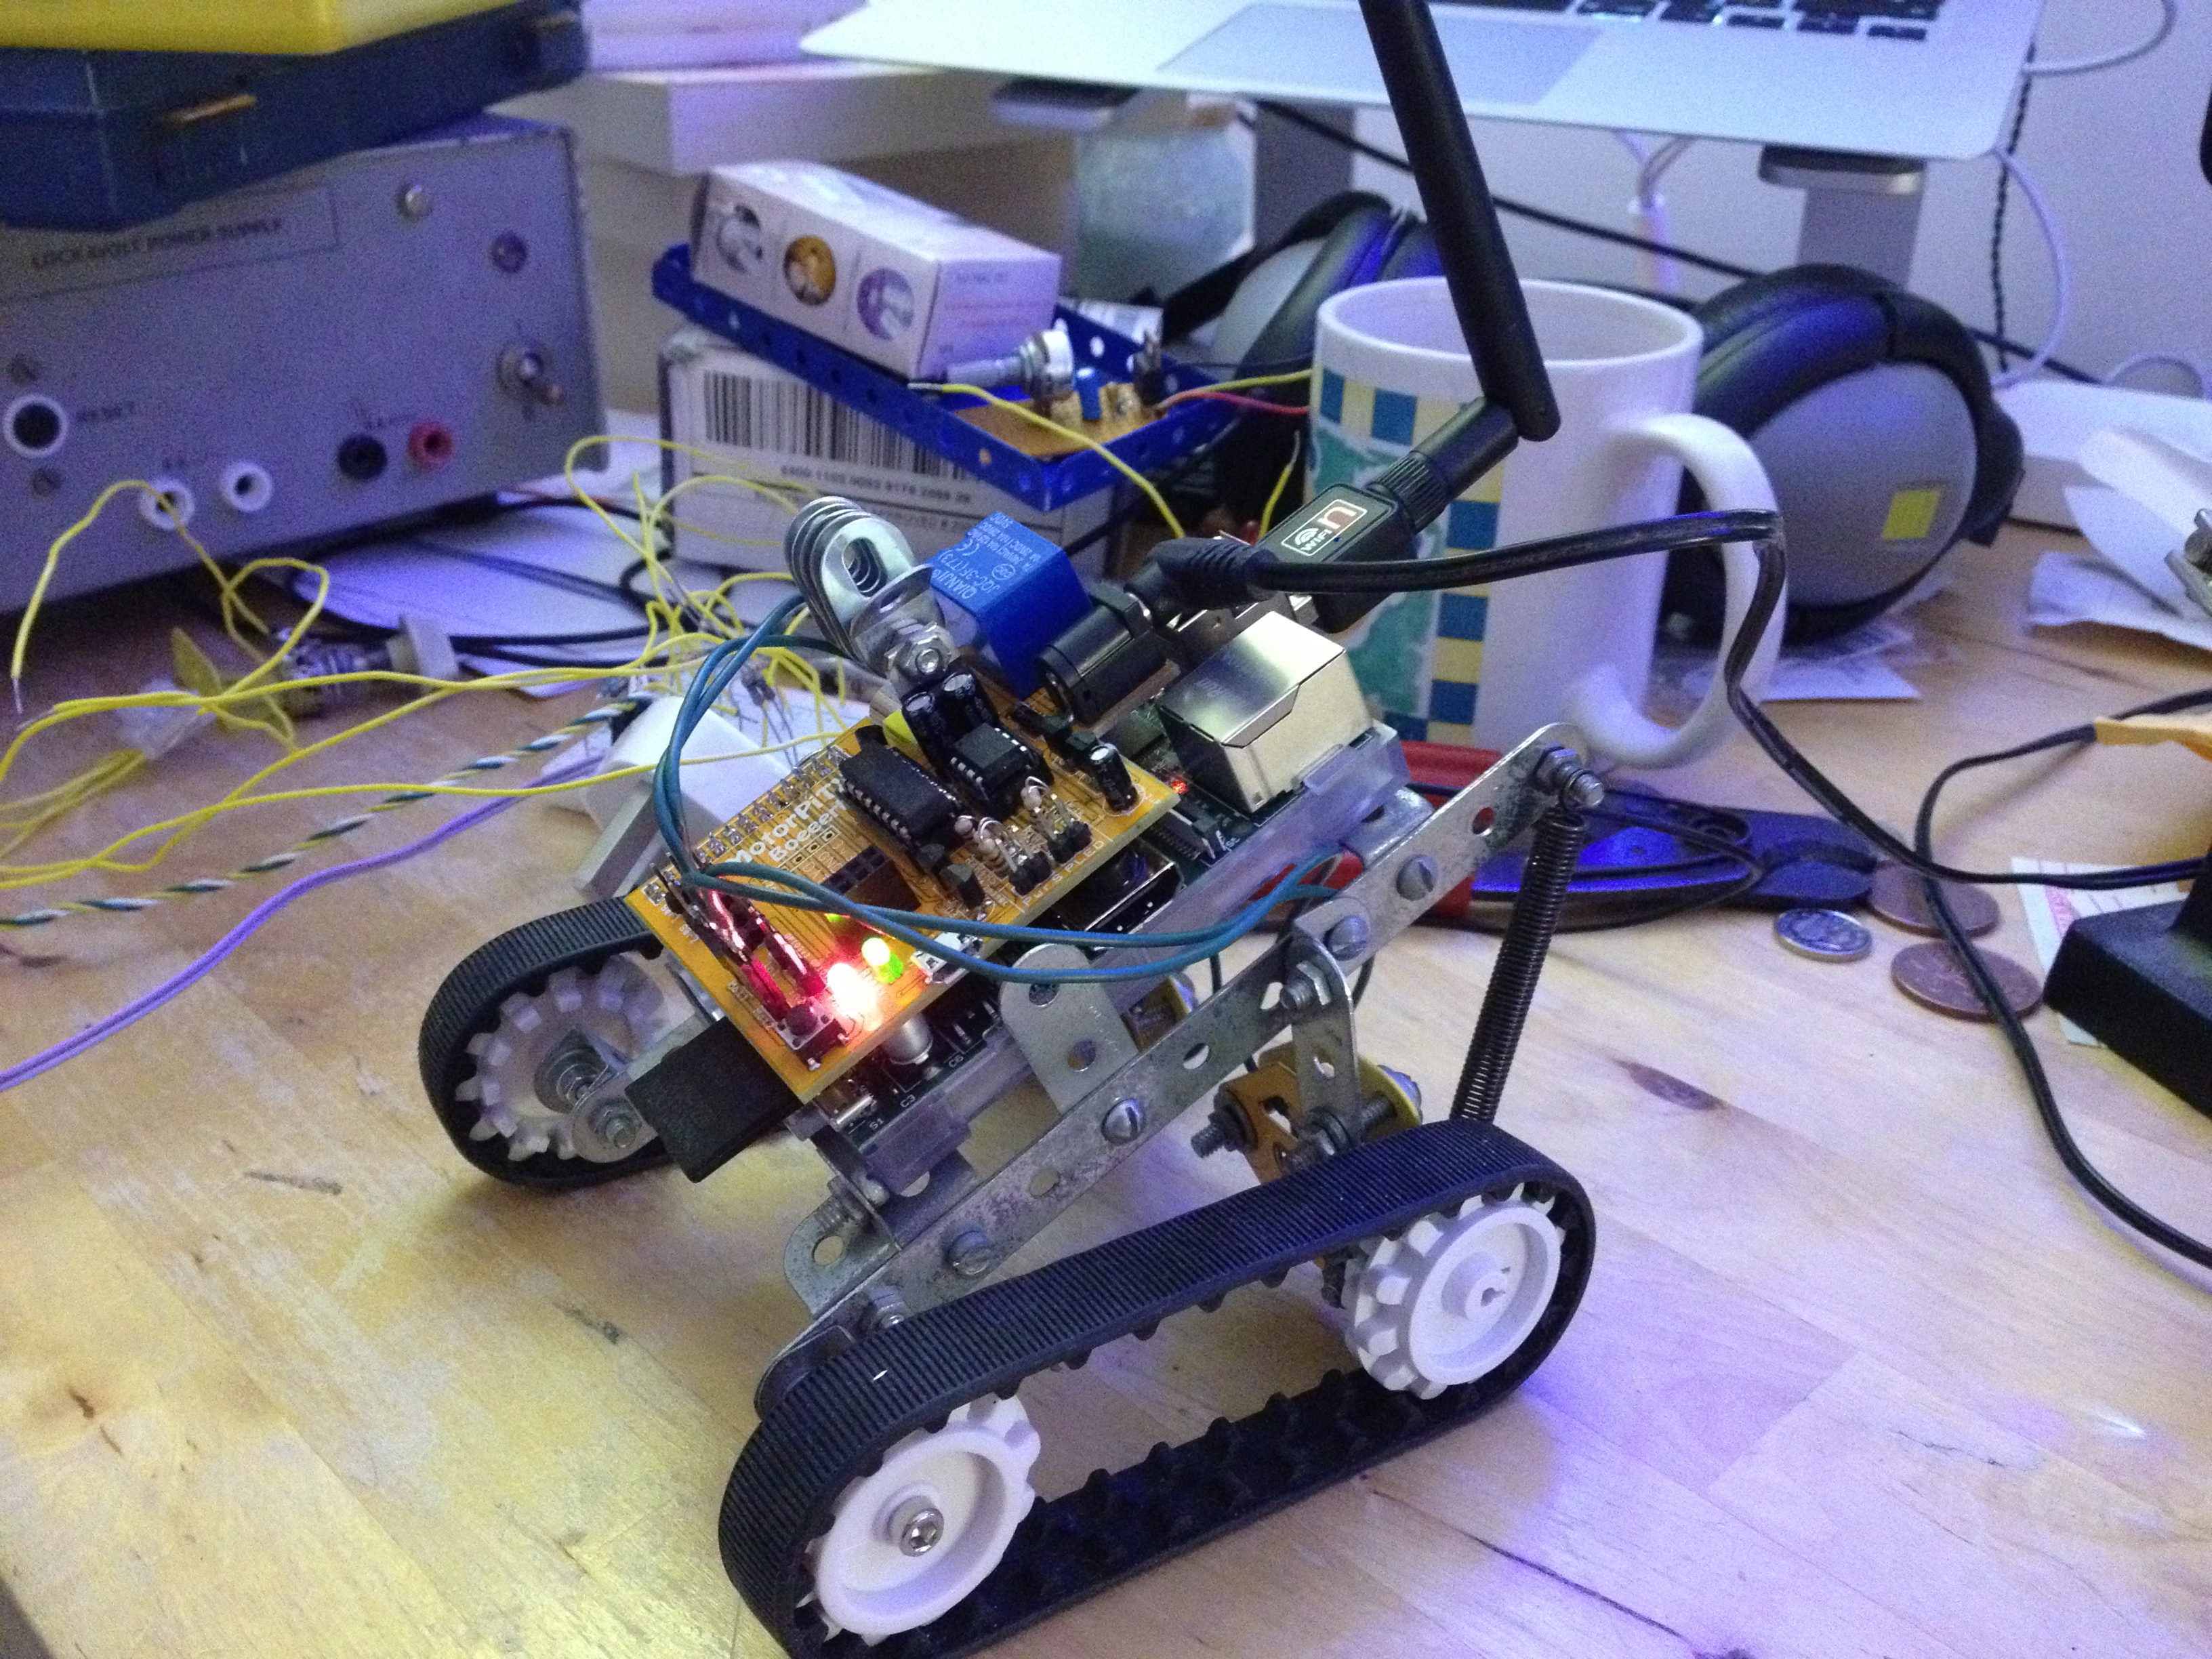 A prototype robot with a MotorPiTX board on top of a Raspberry Pi